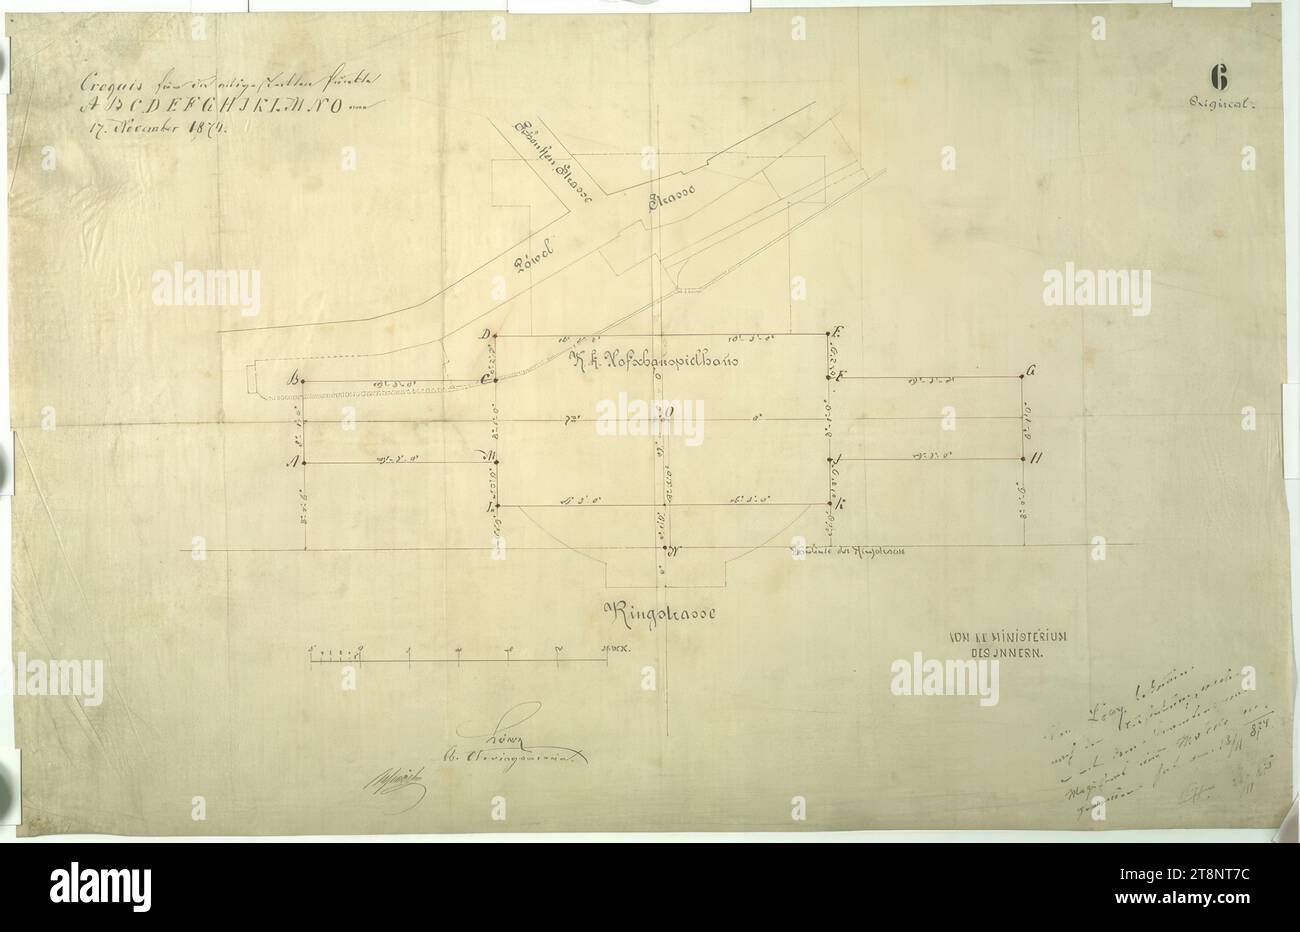 Vienna I, Burgtheater, survey plan of the site, Carl von Hasenauer (Vienna 1833 - 1894 Vienna), November 17, 1874, plan, pen, x mm, 'Croquis for the marked points/ A B C D E F G H J K L M N O on/ November 17, 1874.', '6, Original.', 'FROM THE K. K. MINISTRY/ OF THE INTERIOR', 'Löwy/ kk. Oberingenieur', 'Schmöck', 'Received from Löwy/ after the detachment, which/ he made with the official from/ magistrate and M... on 18/ 11 874/ CH 25/ 11 874 Stock Photo